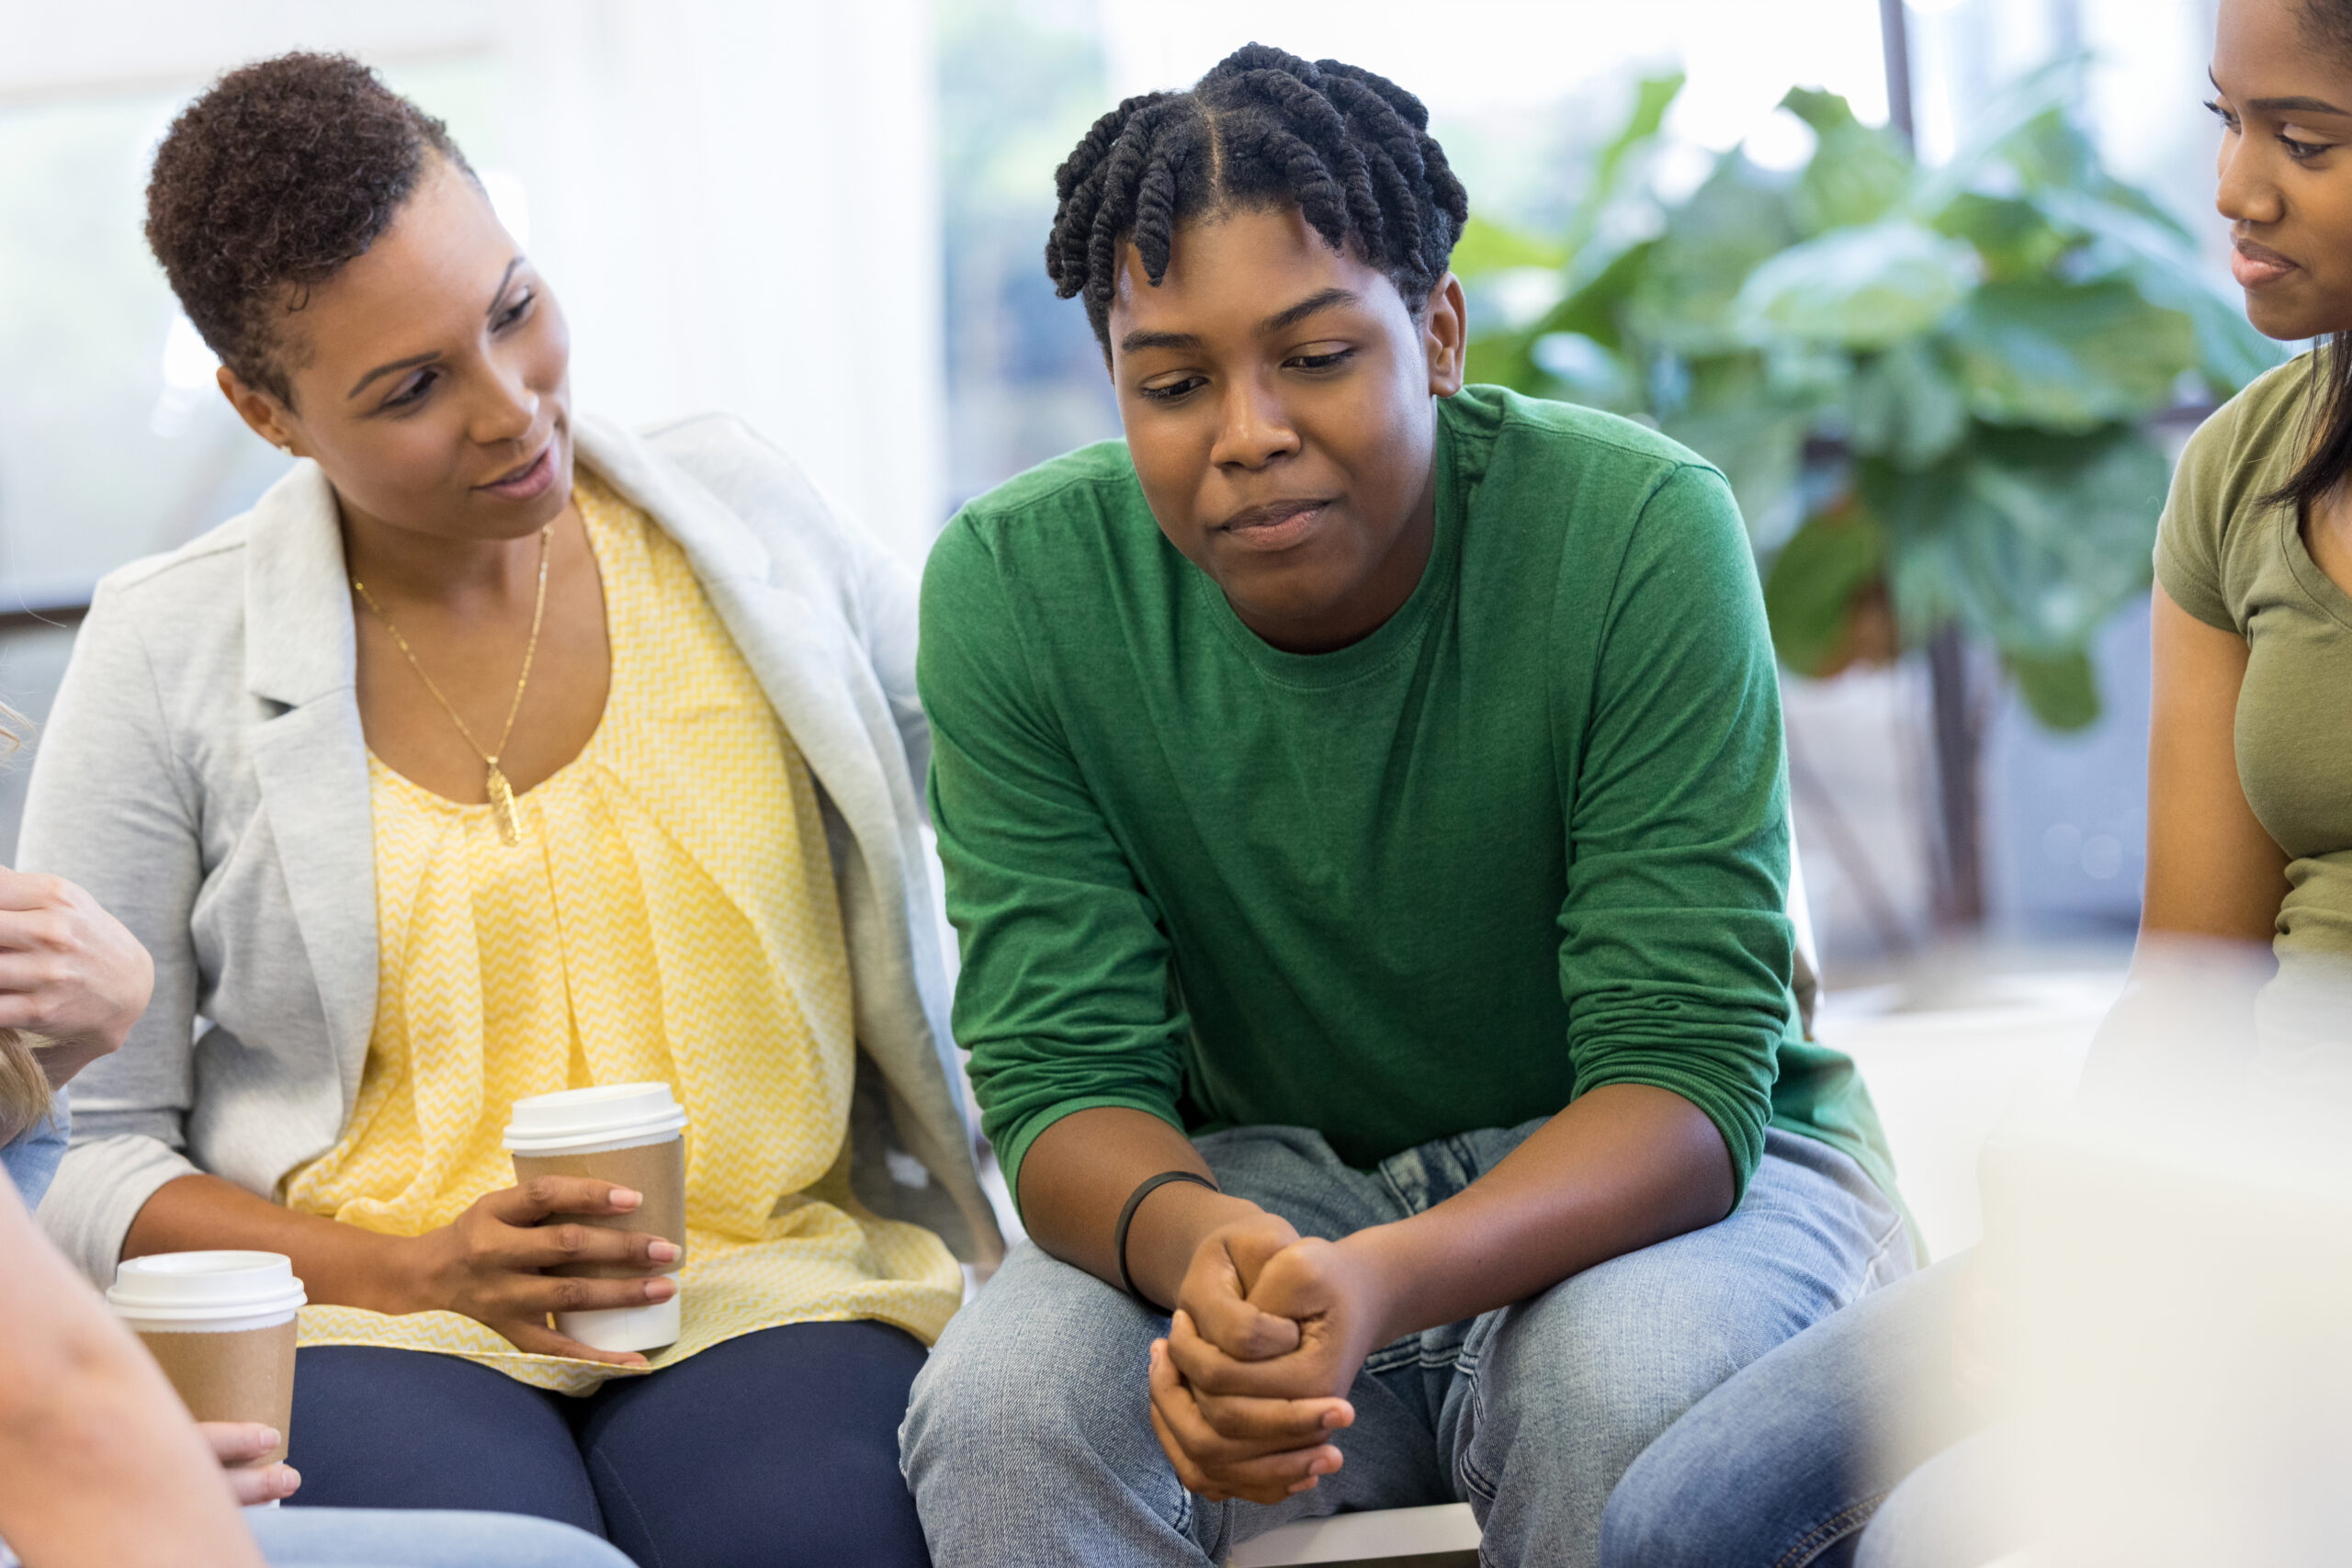 Image of a woman in a green shirt taking part in group therapy in Atlanta, GA. Showing what to expect from anxiety group therapy in Atlanta. Where a group therapist can guide and support you.